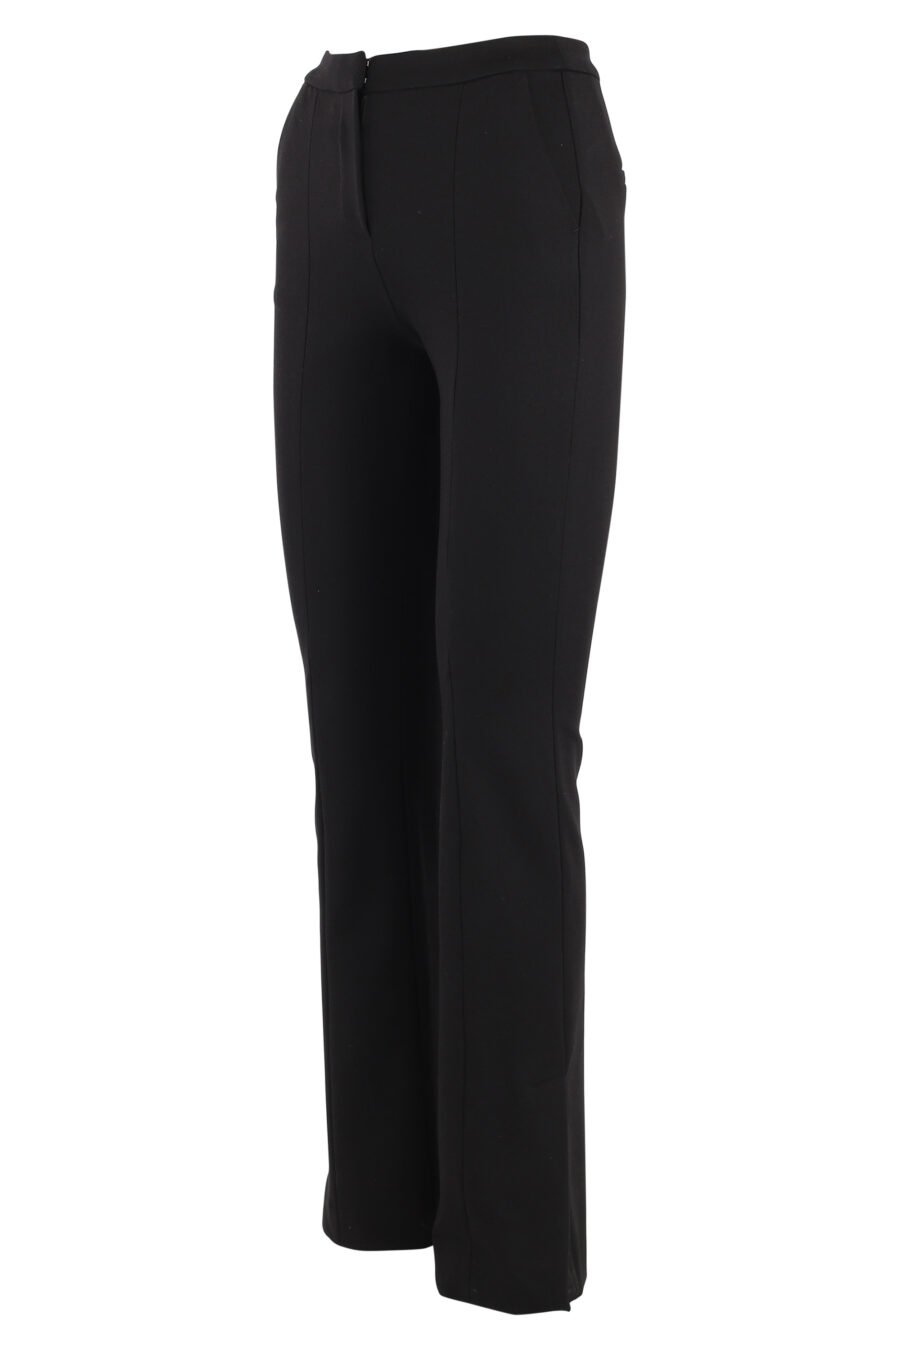 Black trousers with slit and ribbon logo - IMG 5097